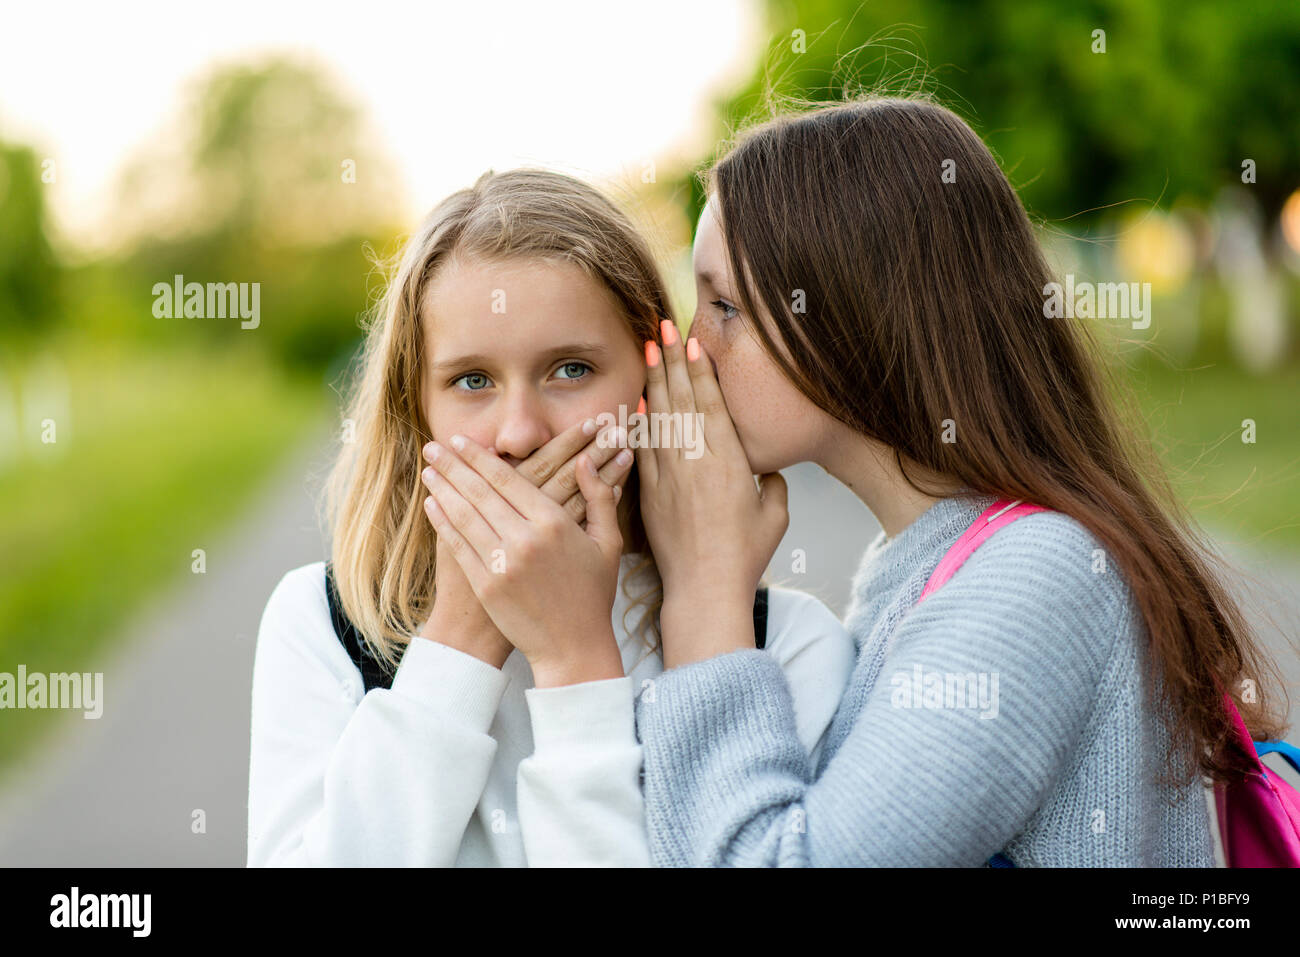 Where girlfriends schoolgirls. Summer in nature. They tell each other a secret. Surprise fear. Emotions of surprise. Dressed in casual clothes. Suddenly, indignation. Stock Photo